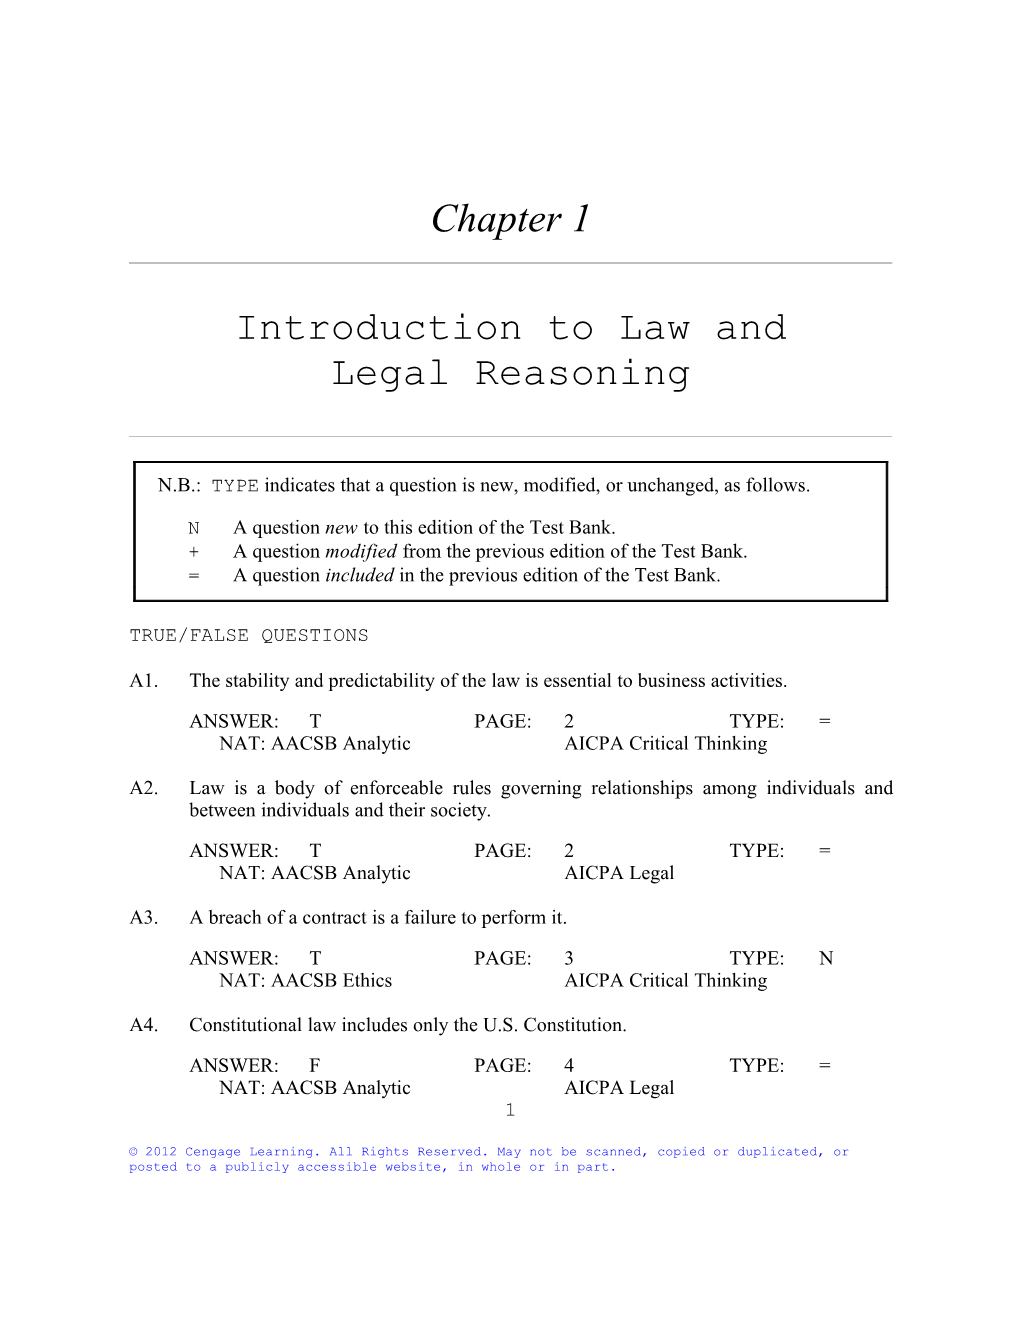 Chapter 1: Introduction to Law and Legal Reasoning 9